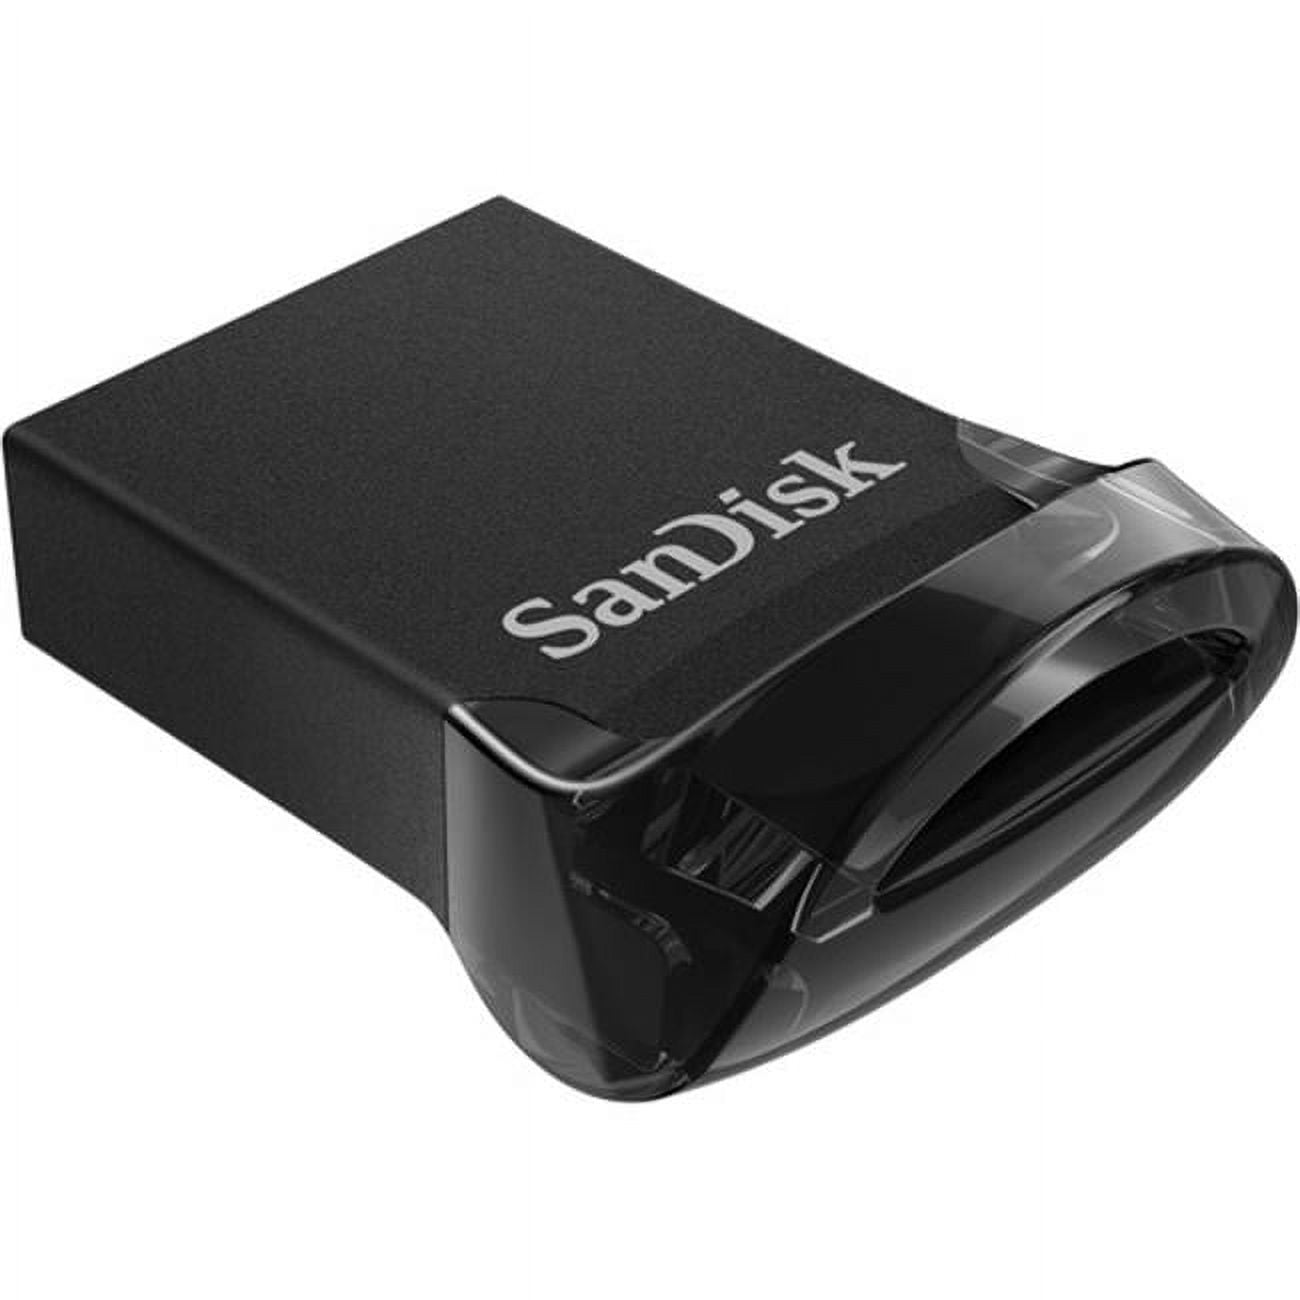 Picture of Sandisk SDCZ430-128G-A46 128 GB USB Flash Drive